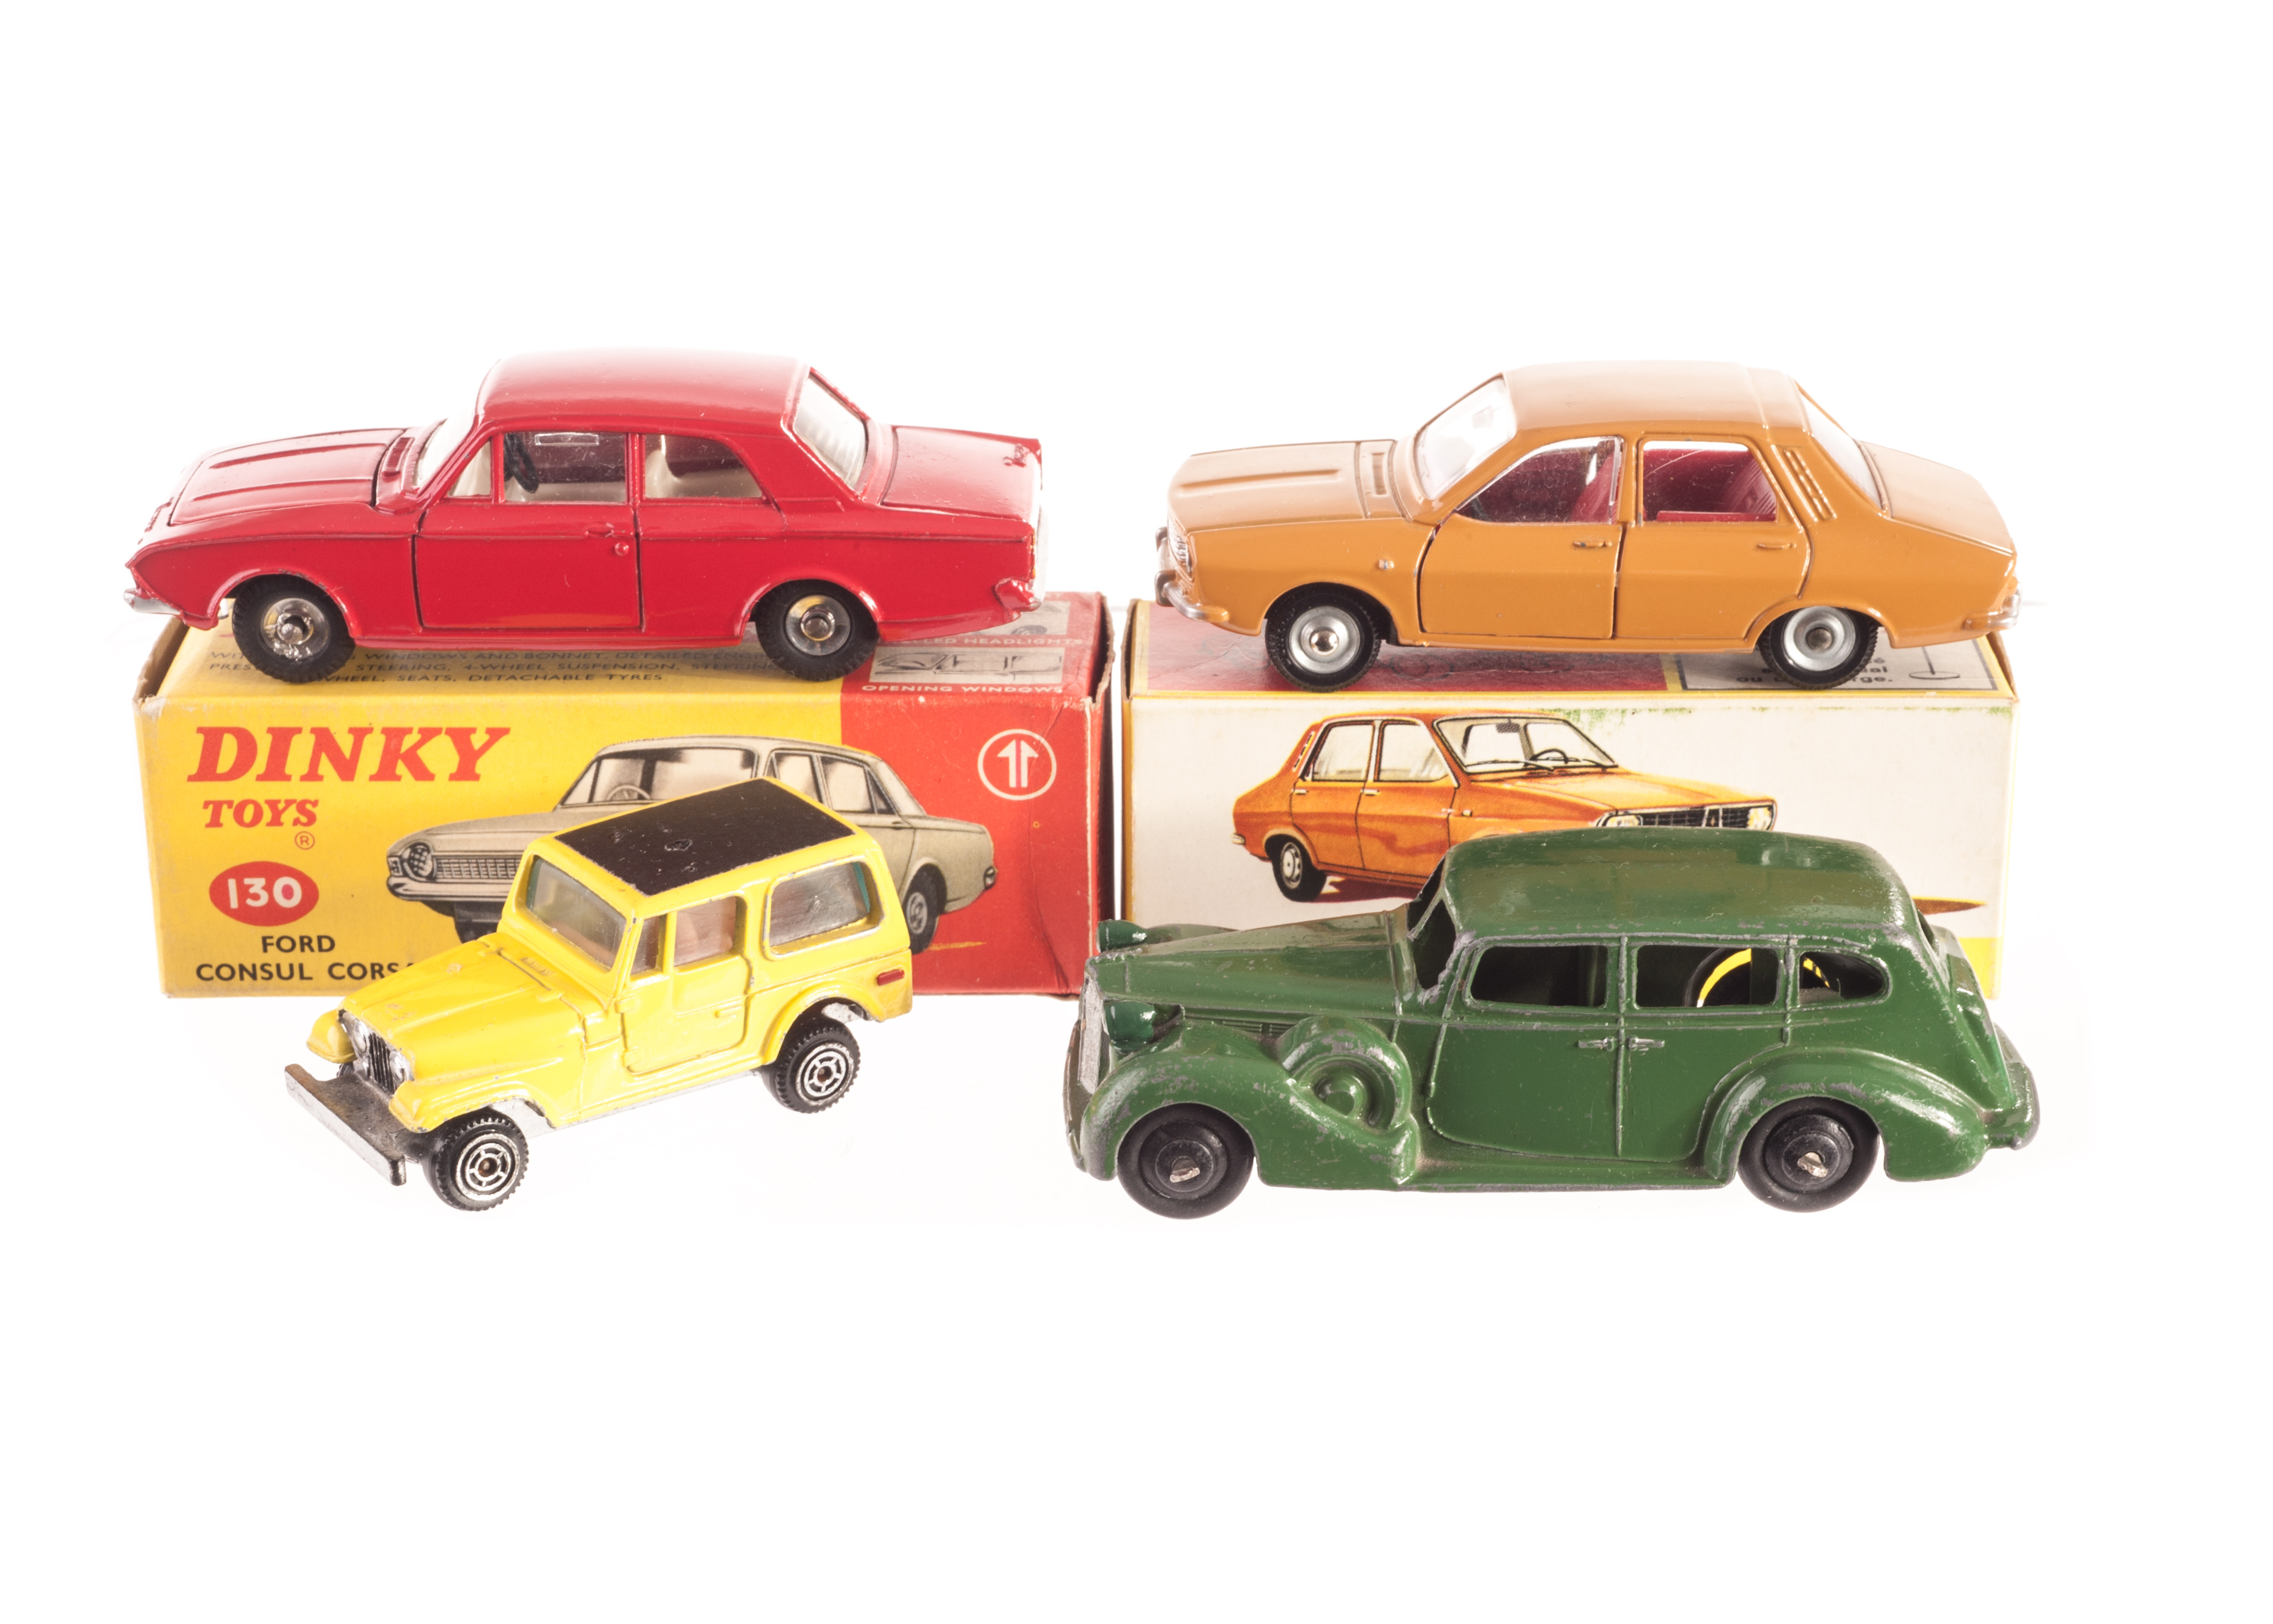 A Dinky Toys 130 Ford Consul Corsair, red body, off-white interior, 1424 Renault 12, in original